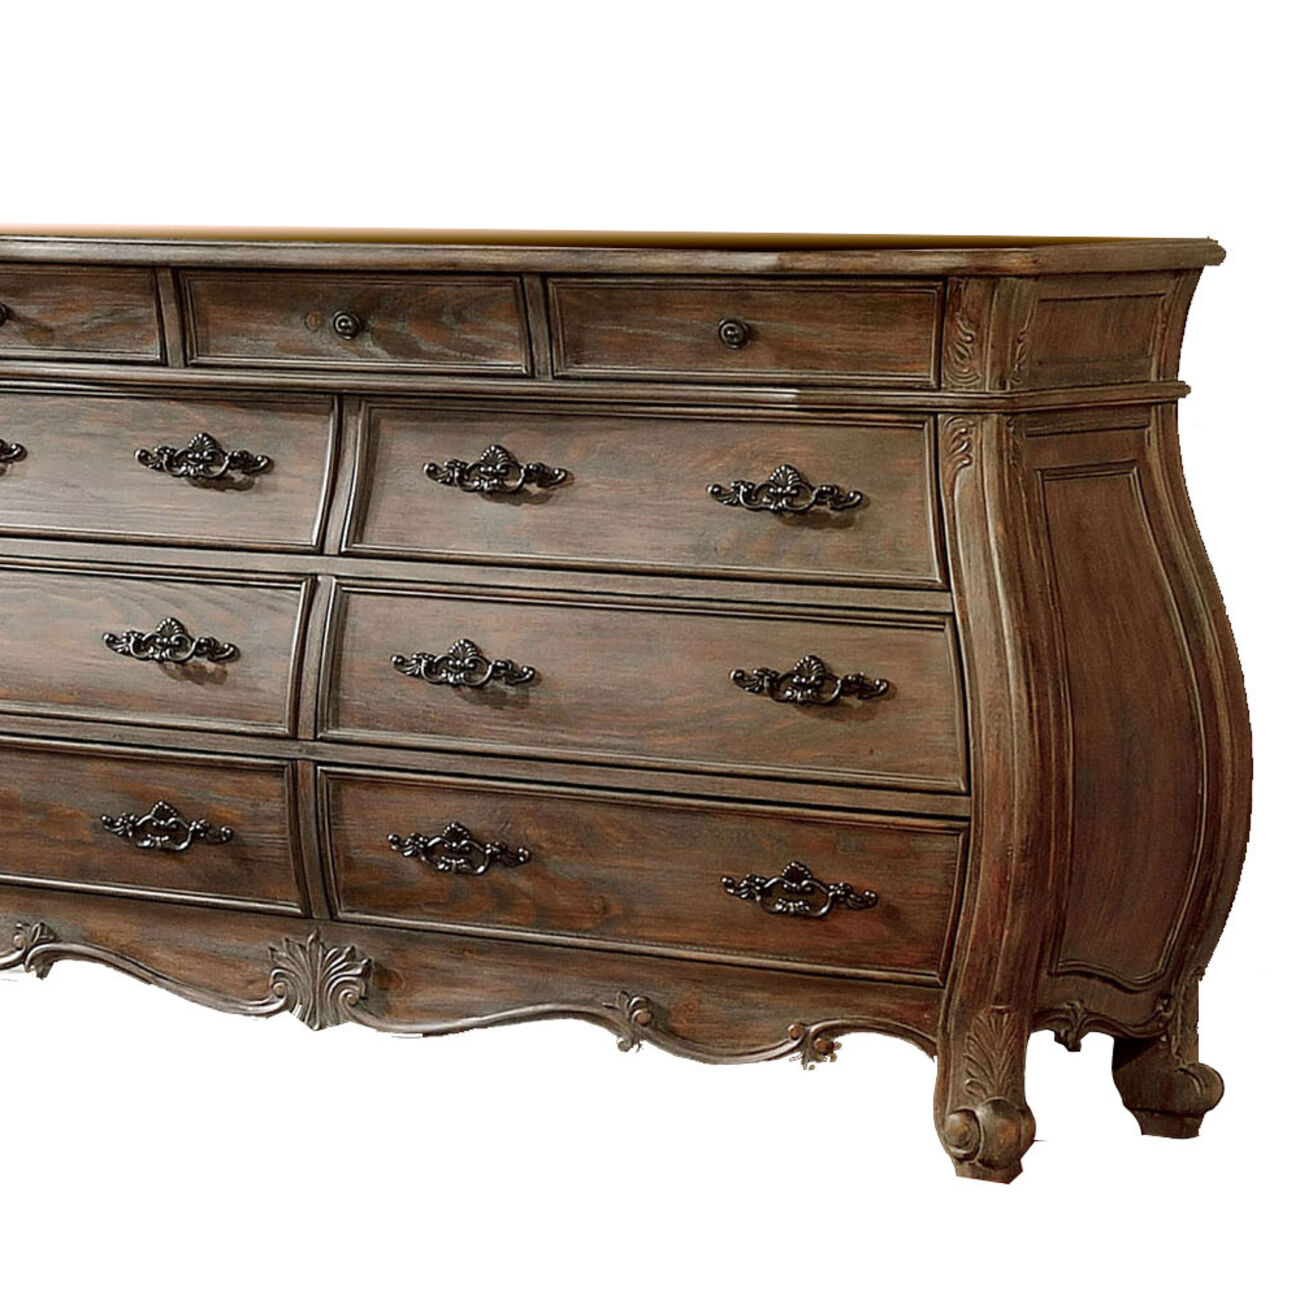 Traditional 9 Drawer Wooden Dresser with Intricate Carvings, Brown